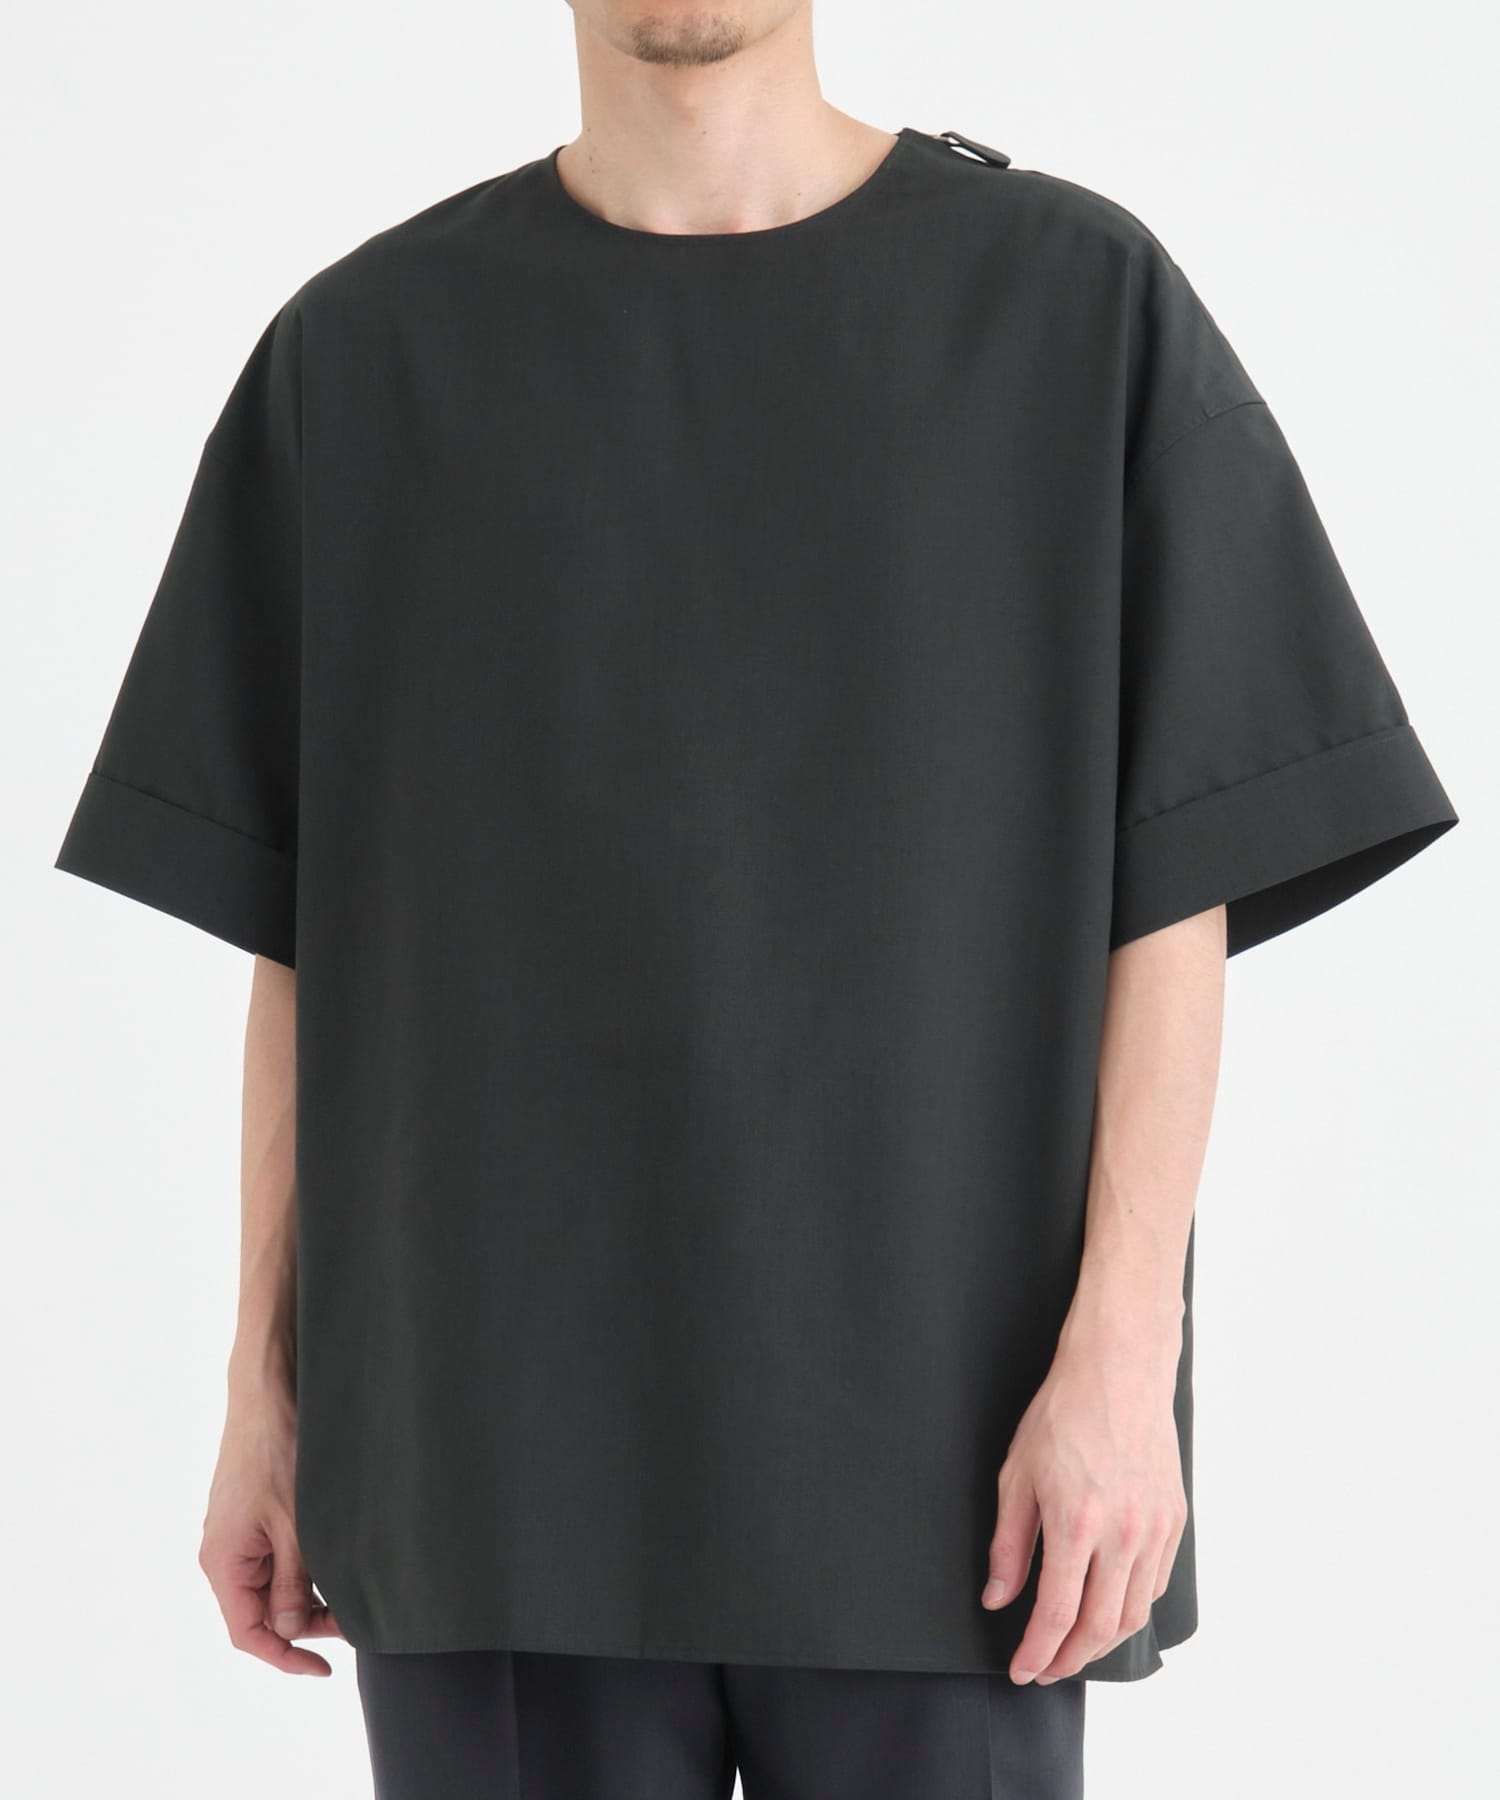 THE SIDE ZIP PO SHIRT S/S